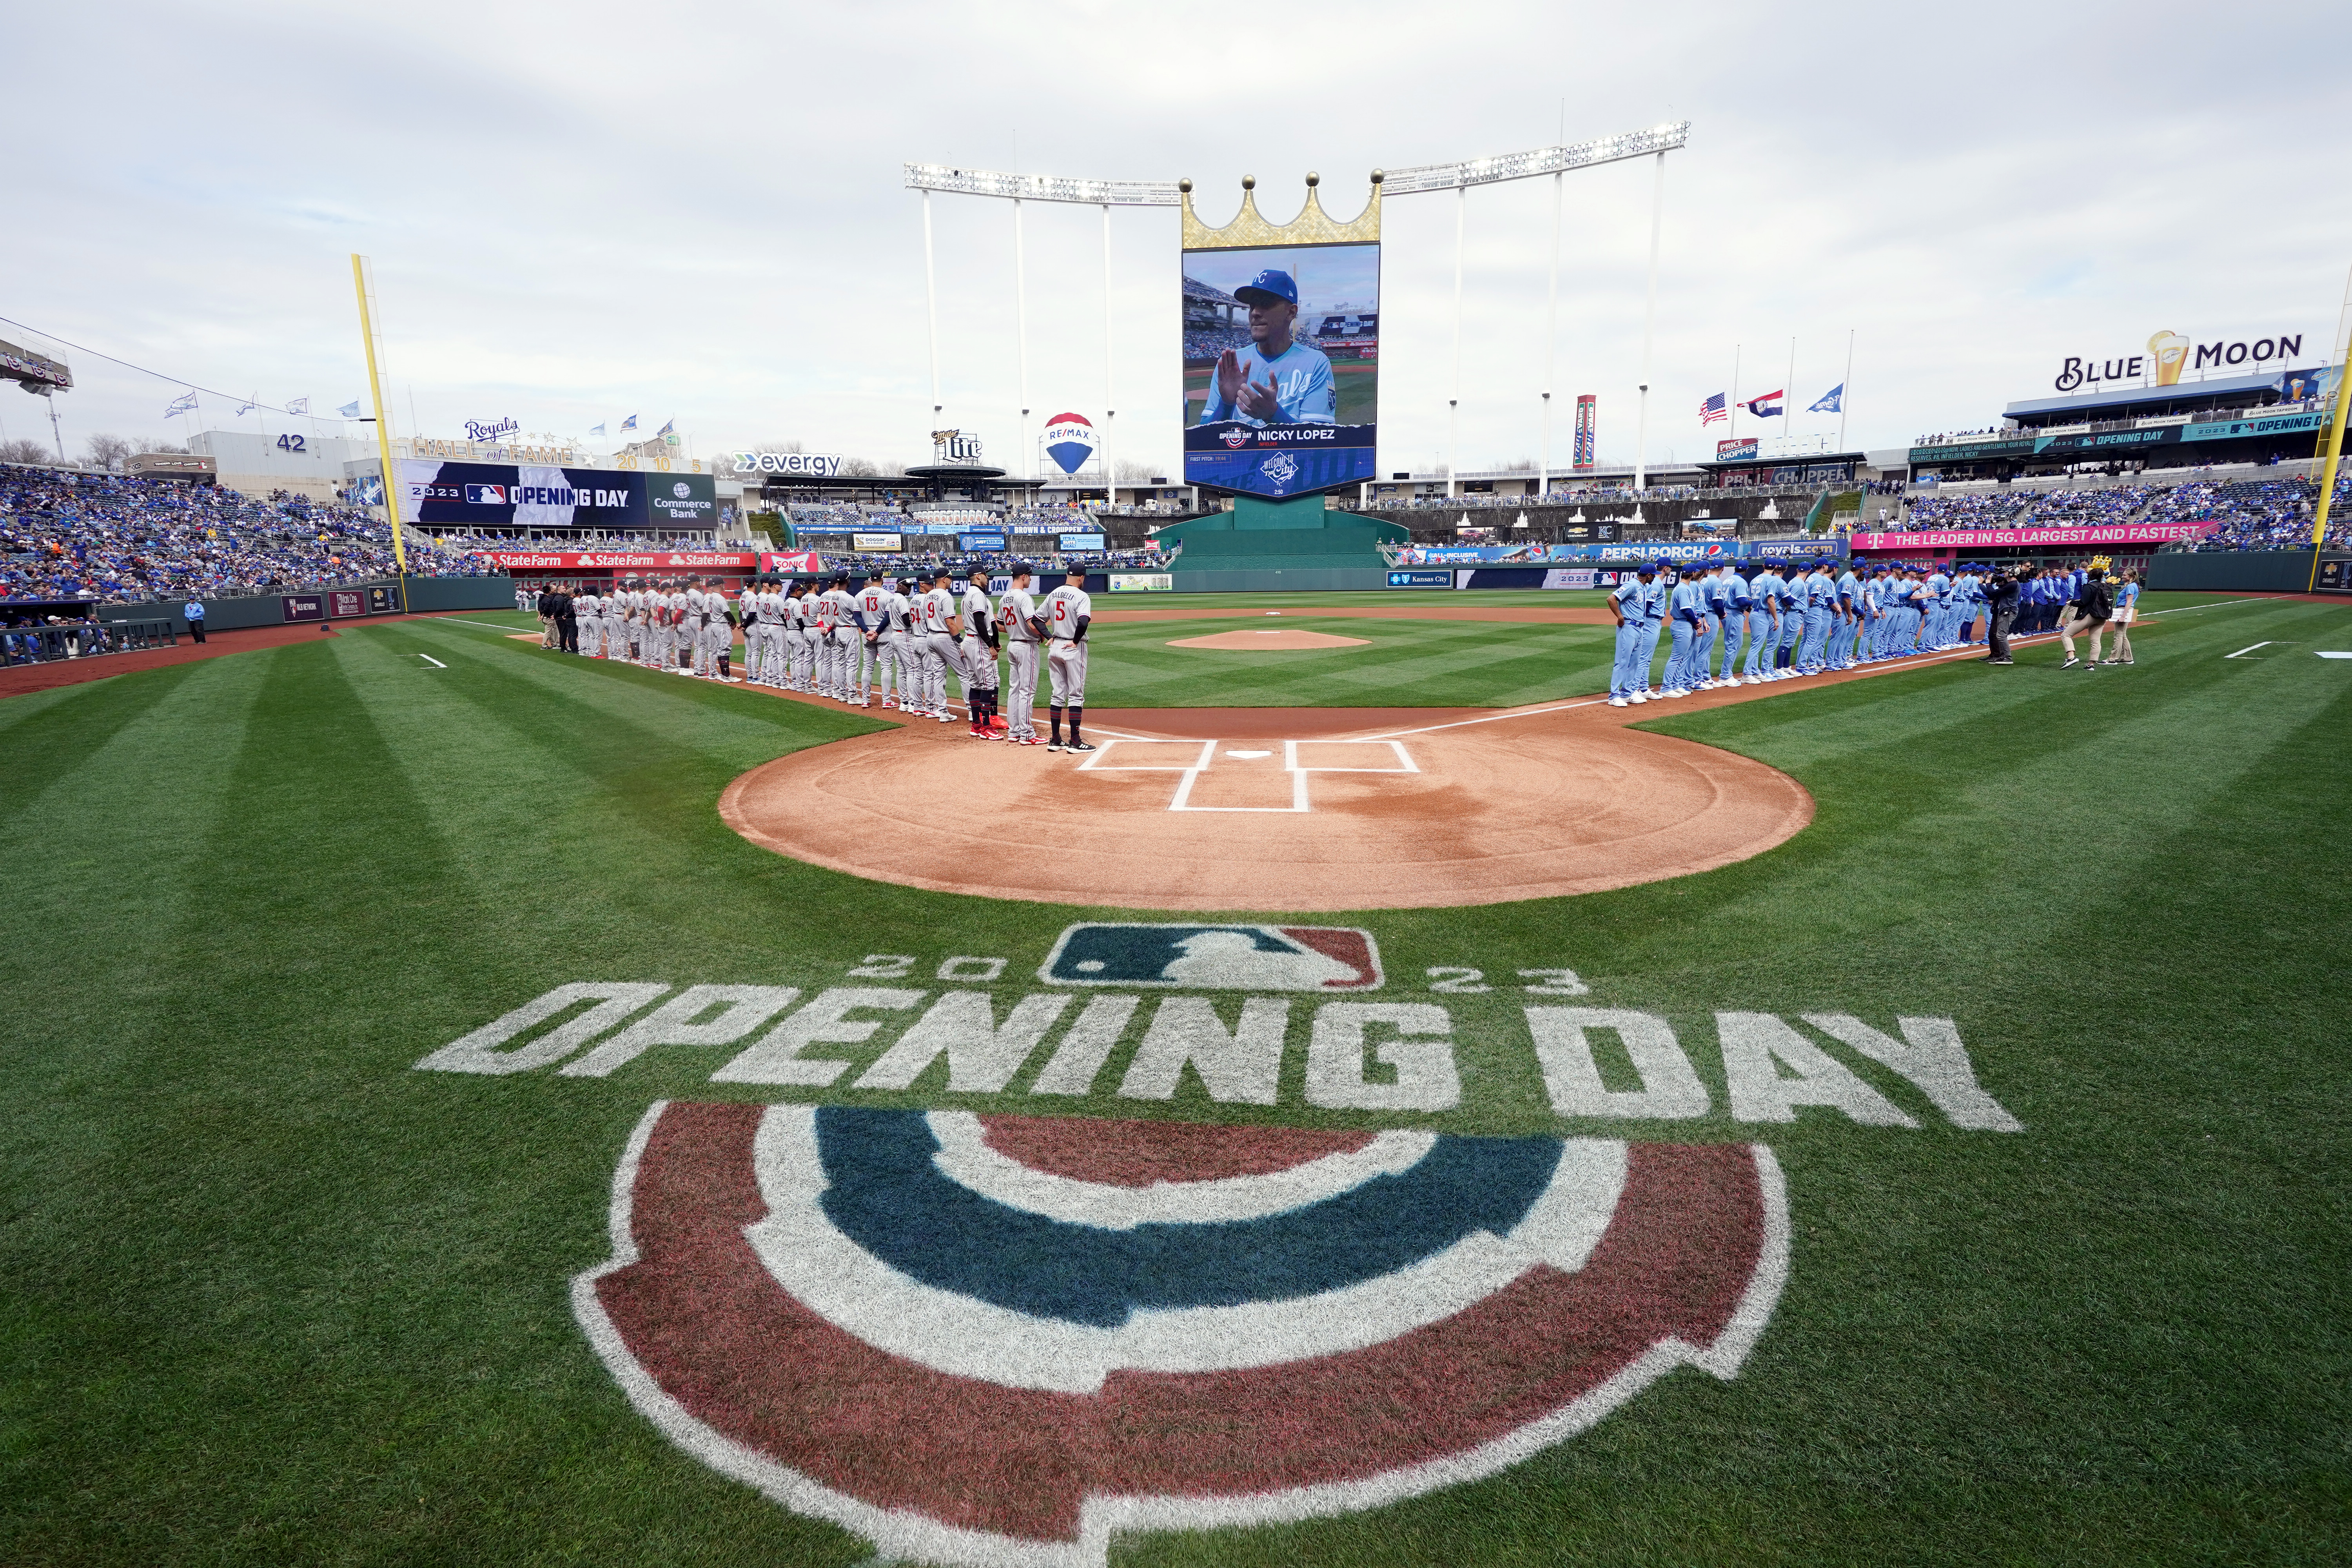 Picture of the grass behind home plate painted, “Opening Day!”